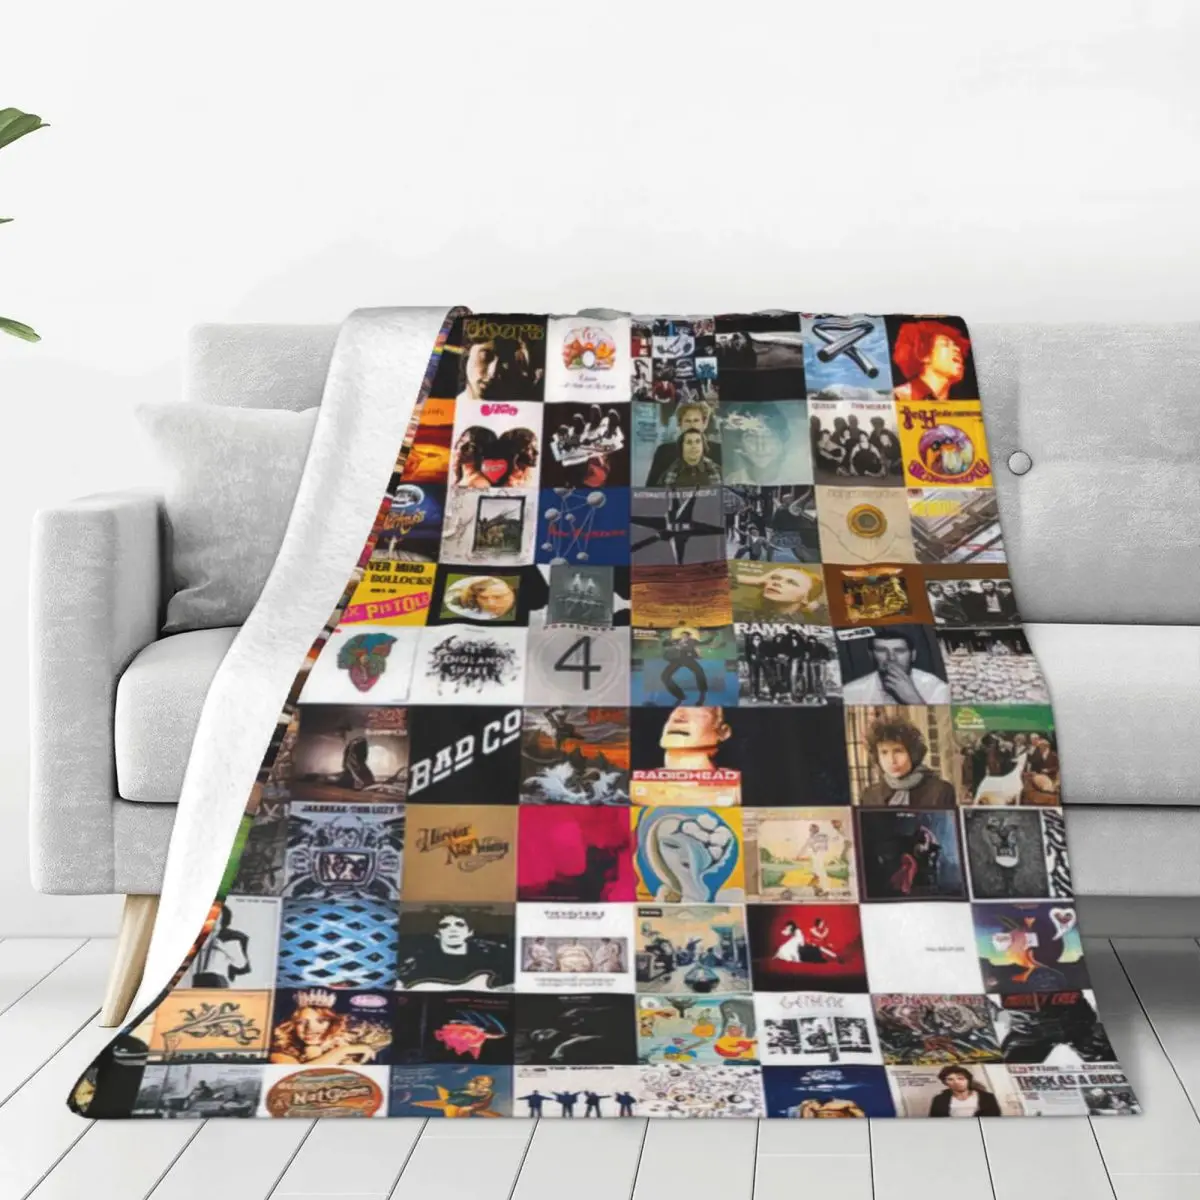 

Greatest Rock Albums Of All Time Flannel Fleece Blanket For Kids Teens Adults Soft Cozy Warm Fuzzy